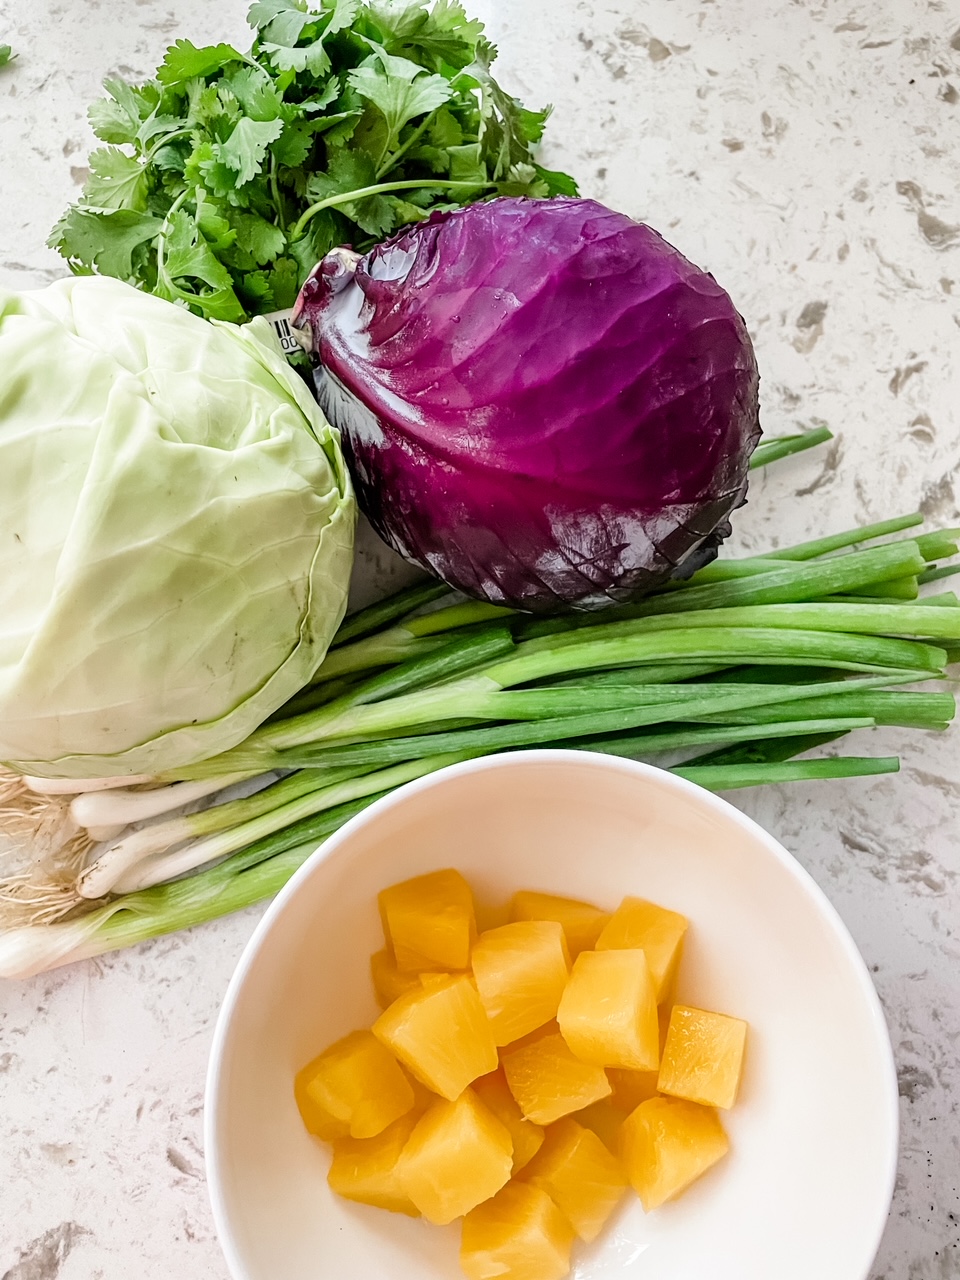 Some of the ingredients for the Spicy Pineapple Coleslaw - pineapple, lettuces, and green onion